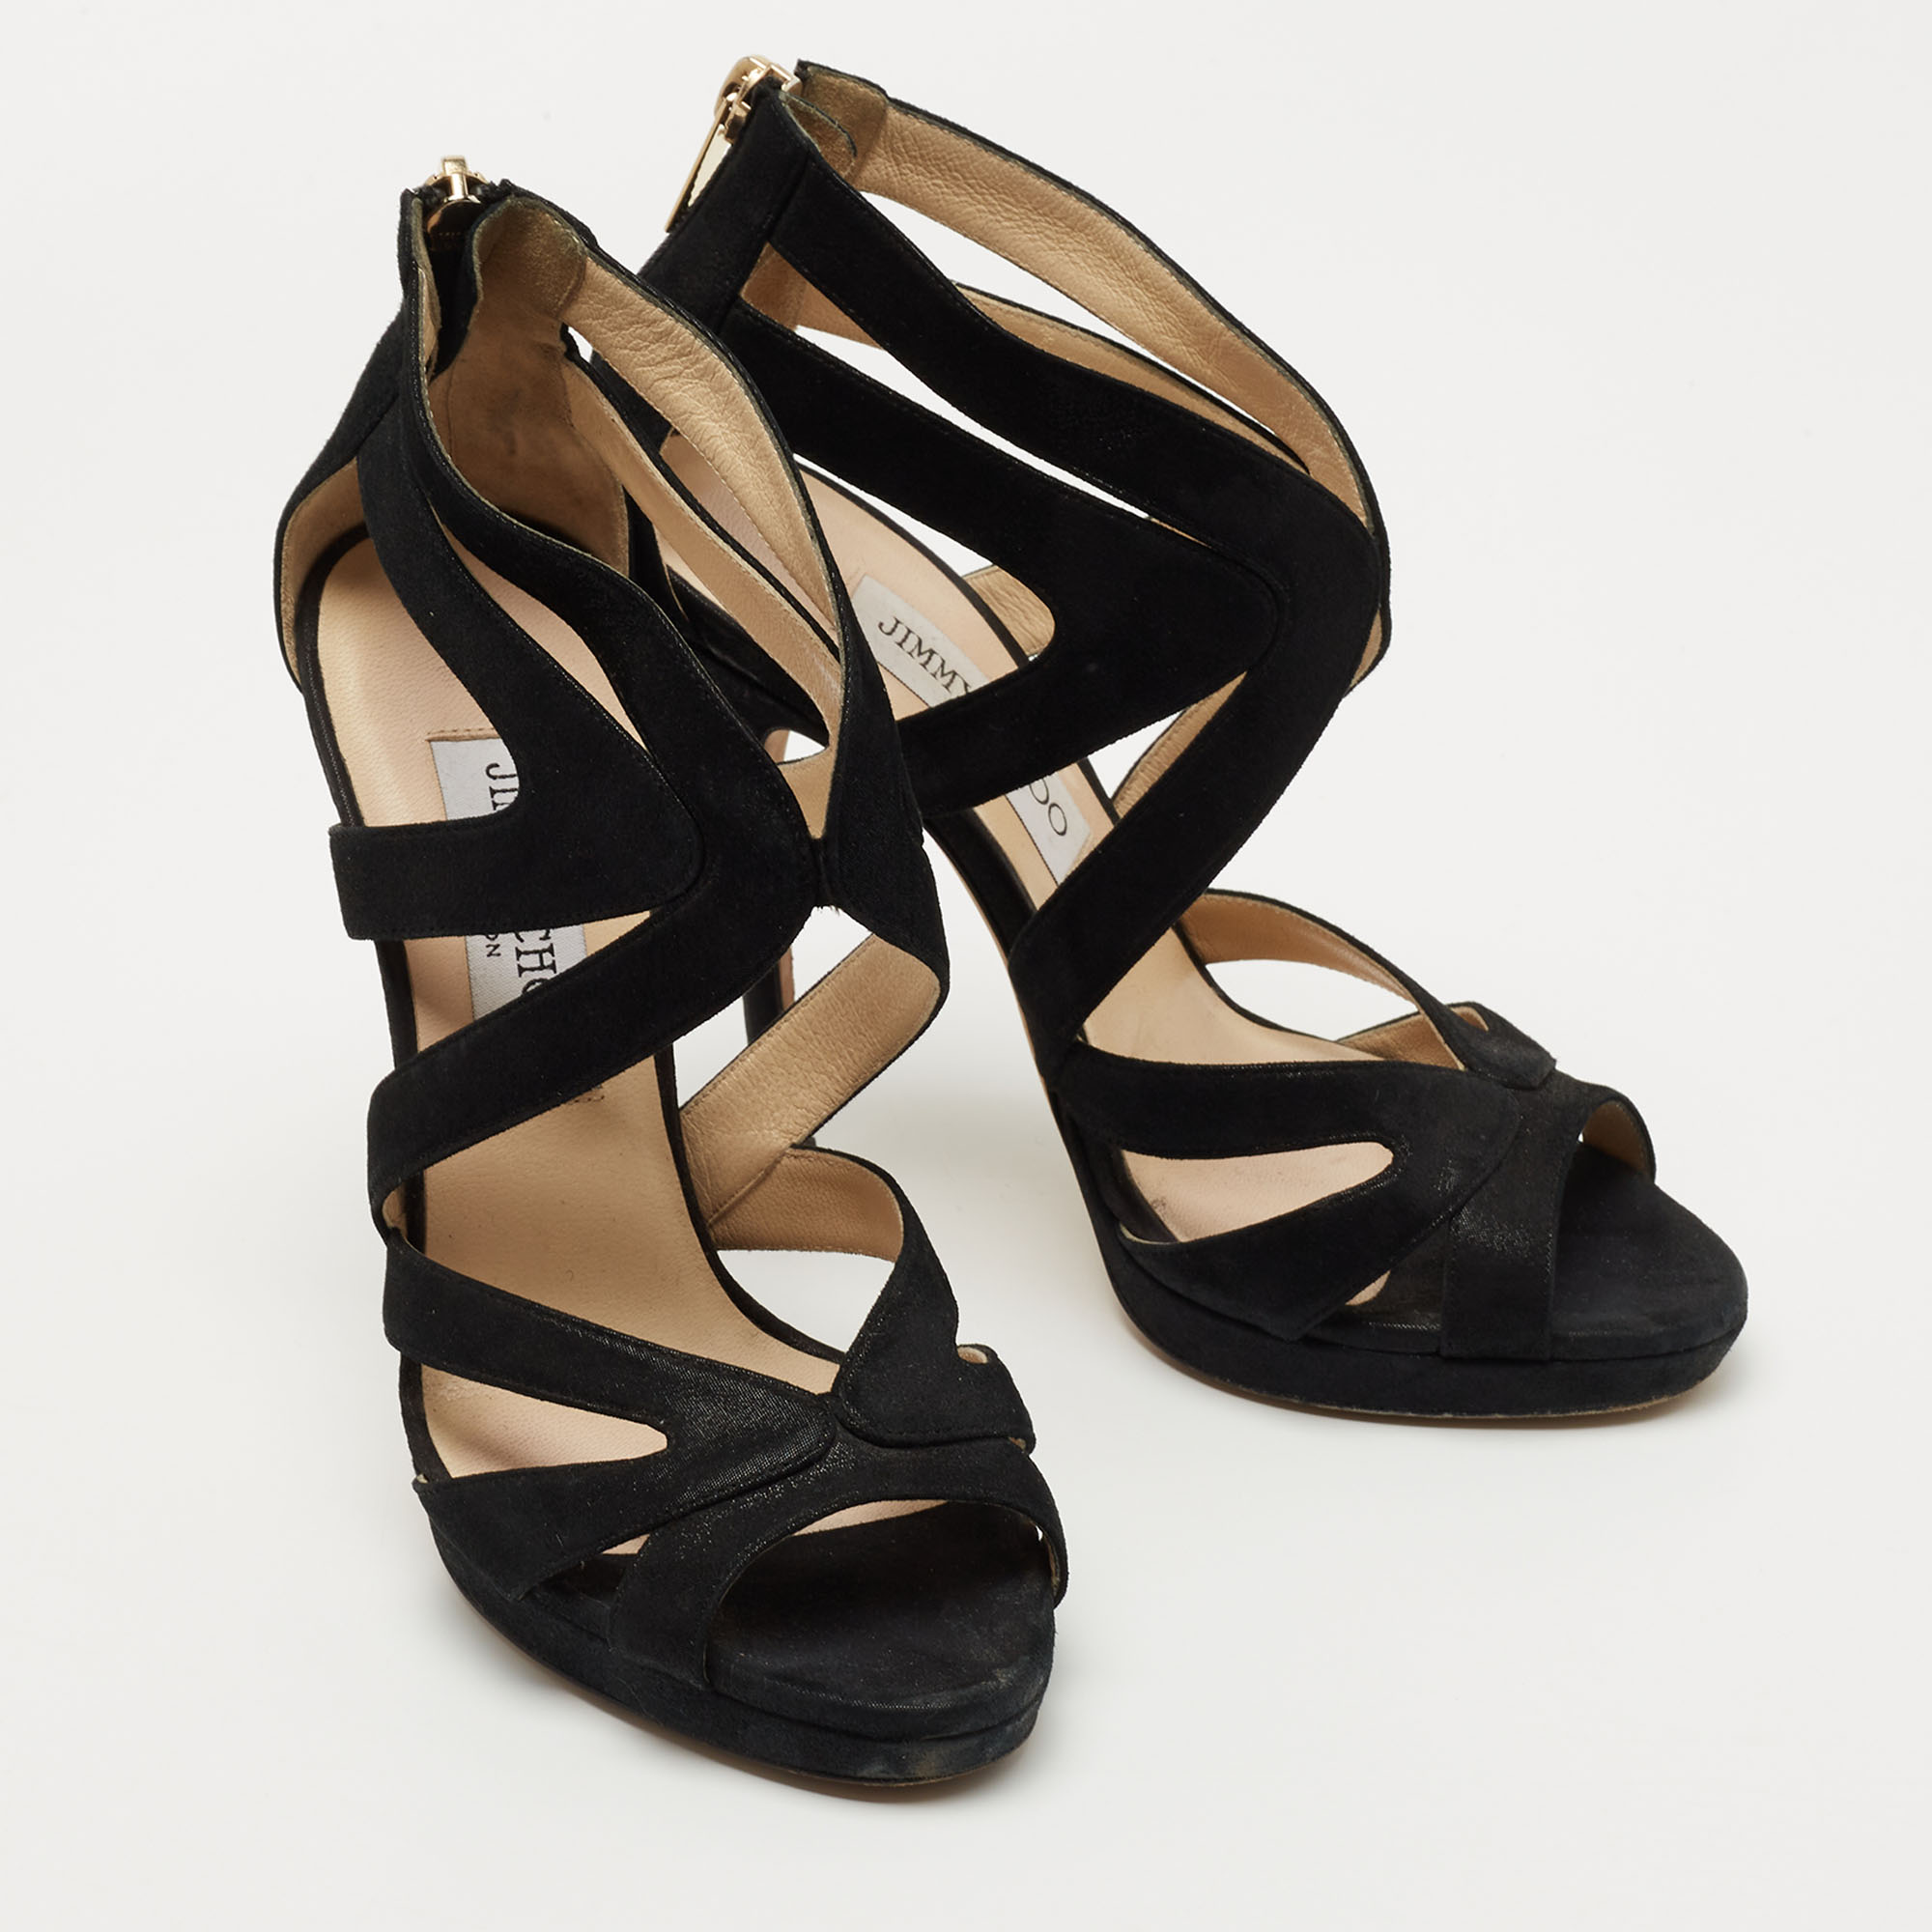 Jimmy Choo Black Suede Strappy Sandals Size 36